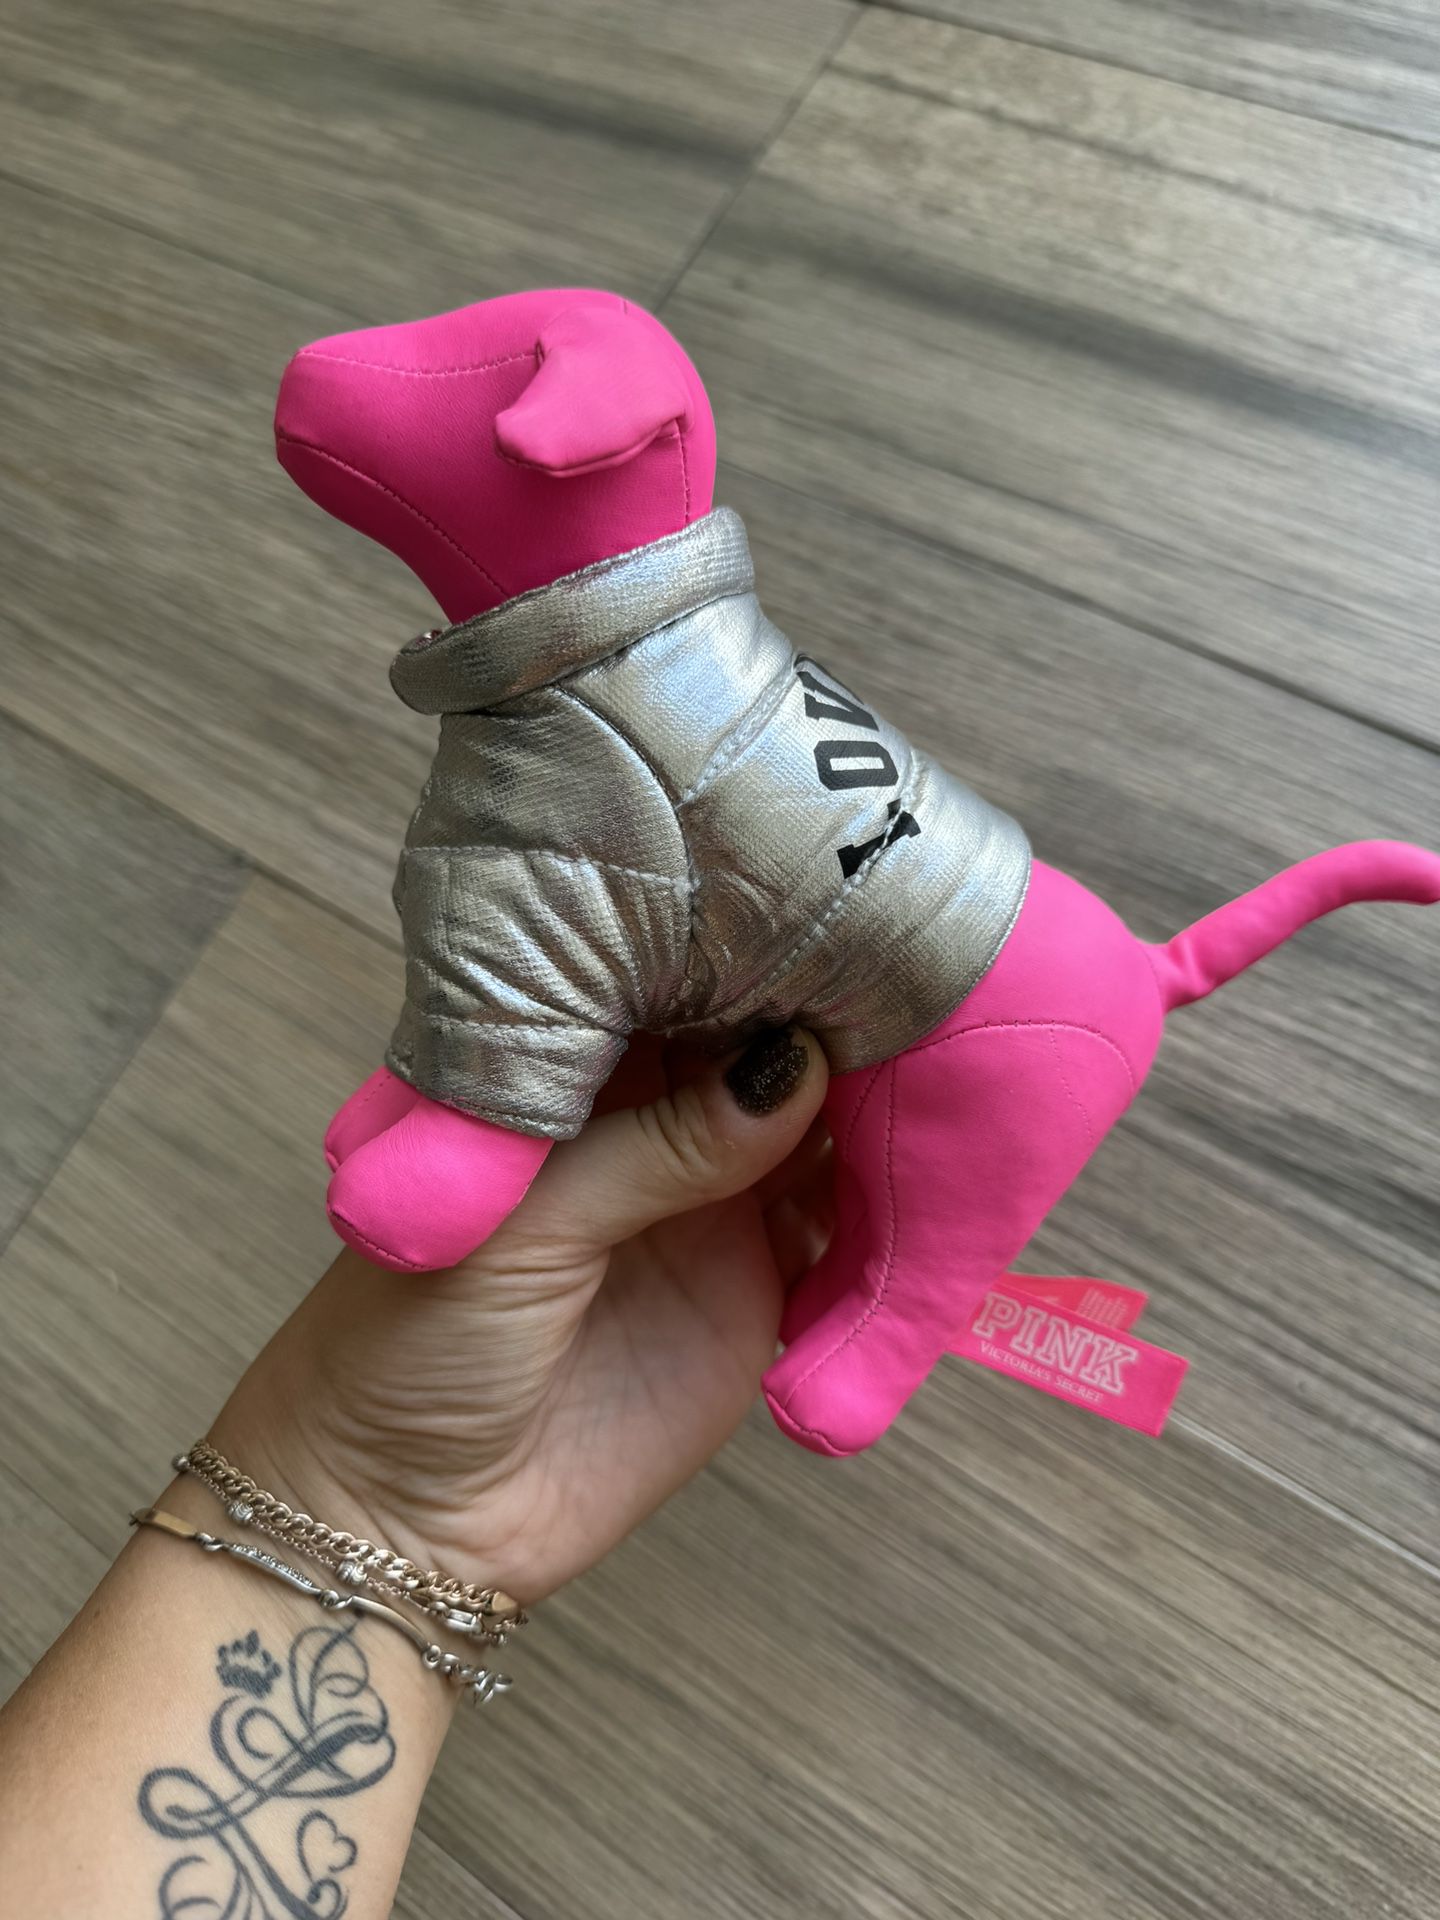 Victoria's Secret Limited Edition LOVE PINK Mini Dog With Puffer Jacket